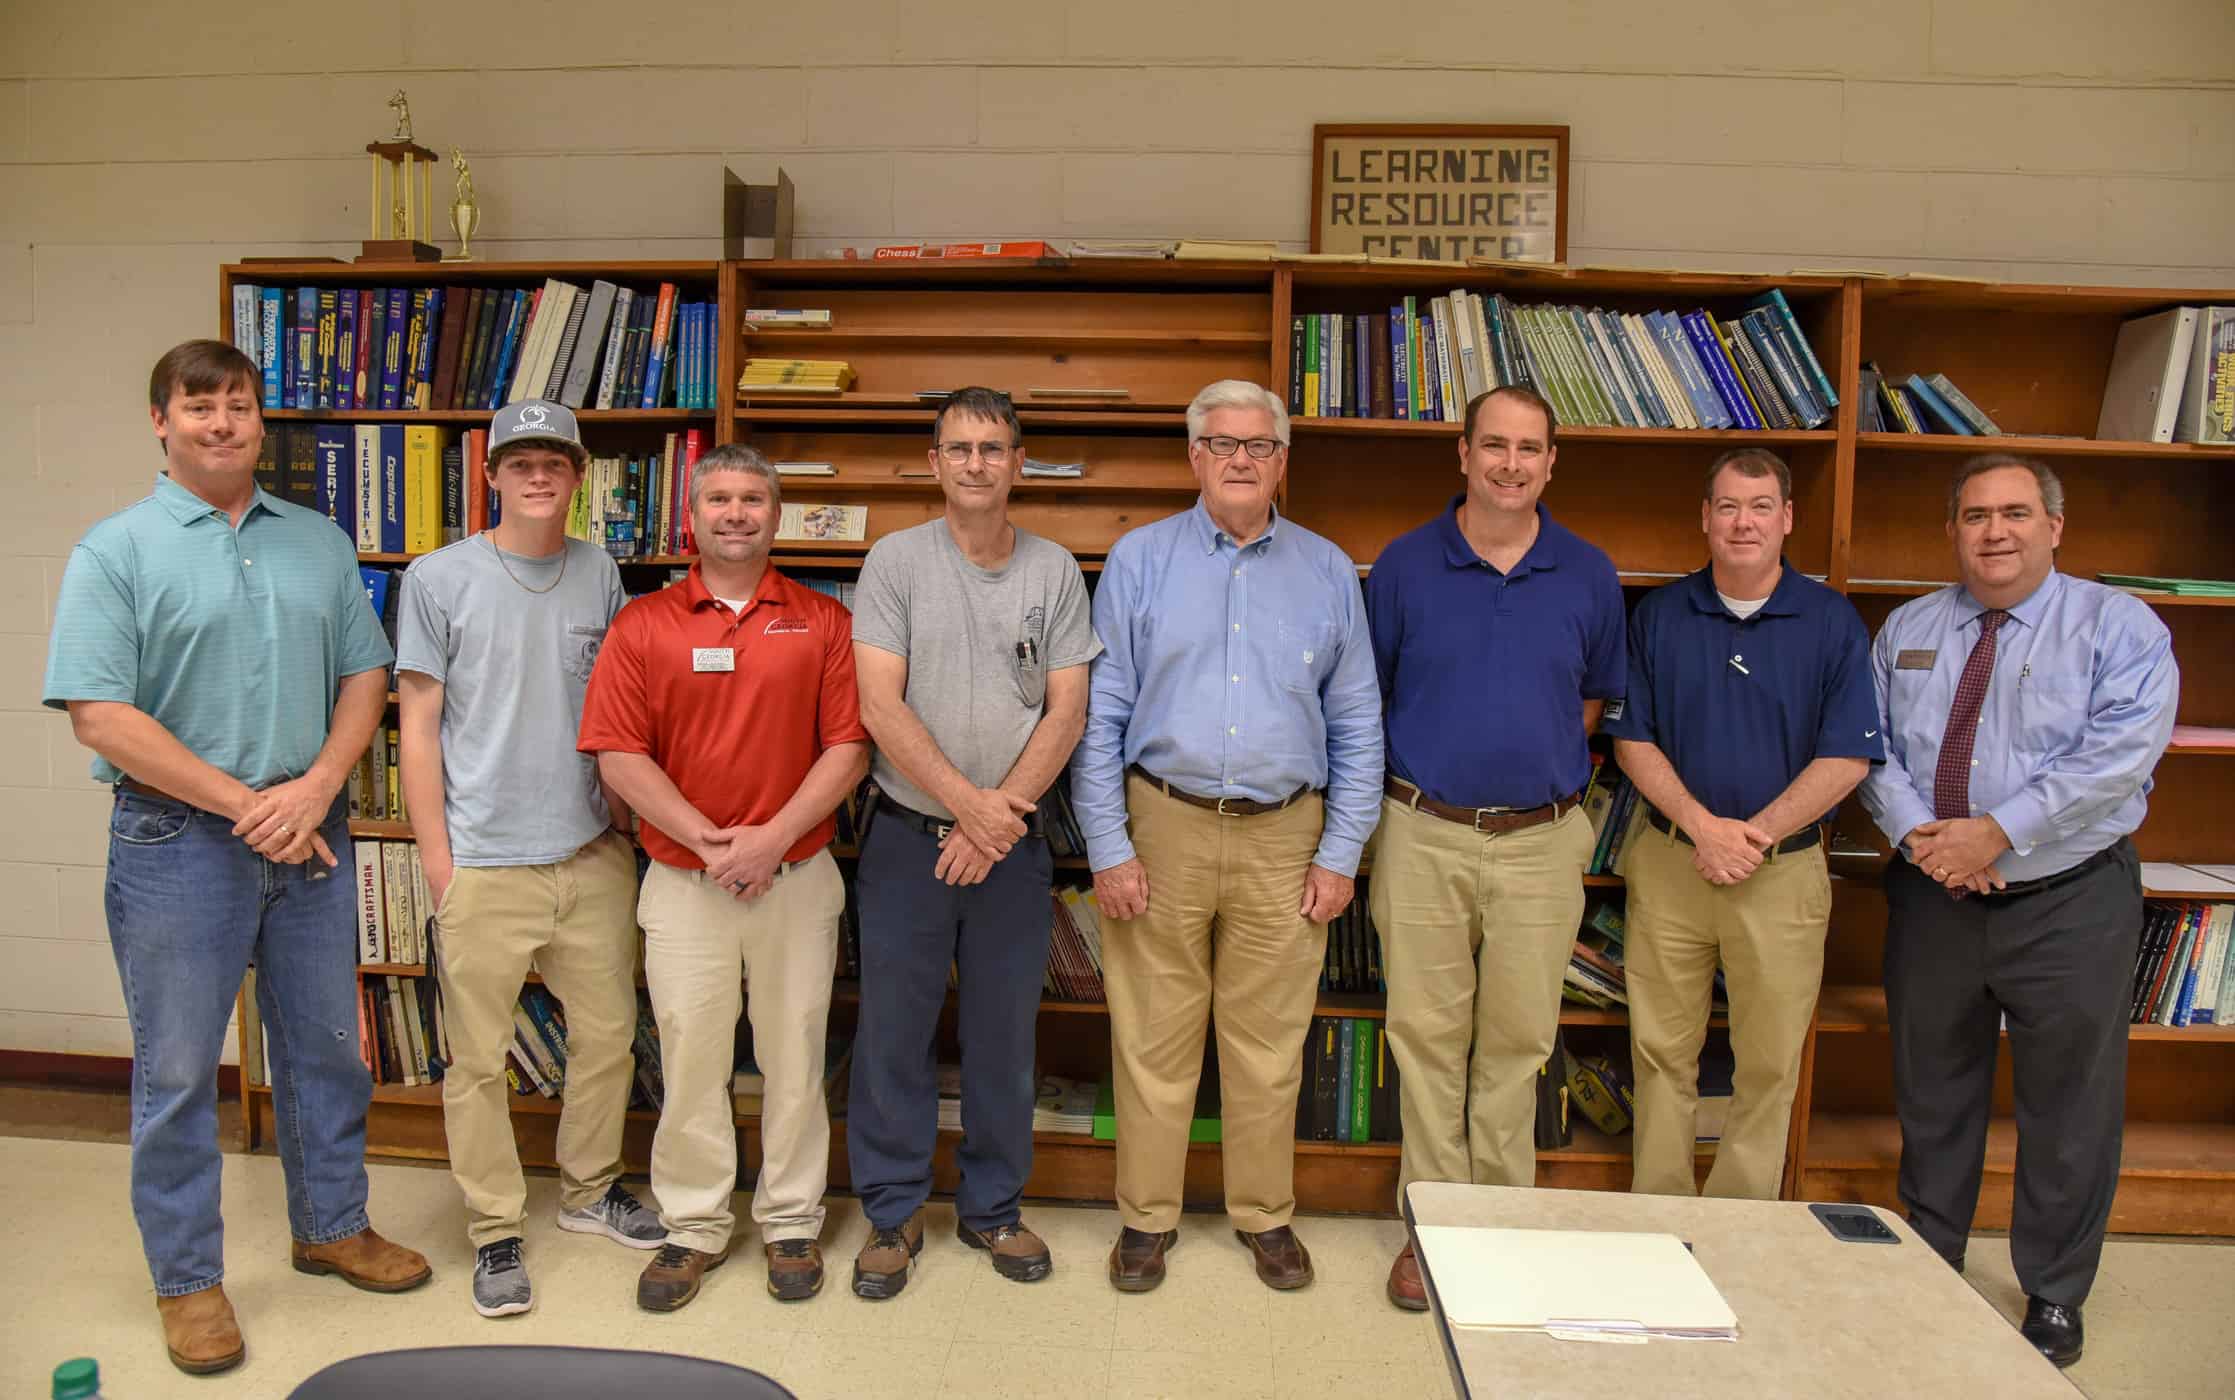 Advisory committee members (l to r) John Hayes, Caleb Abell, Brian McDowell, Paul Battle, Raymond Holt, Glynn Cobb, Brian McMichael and Paul Farr stand together.